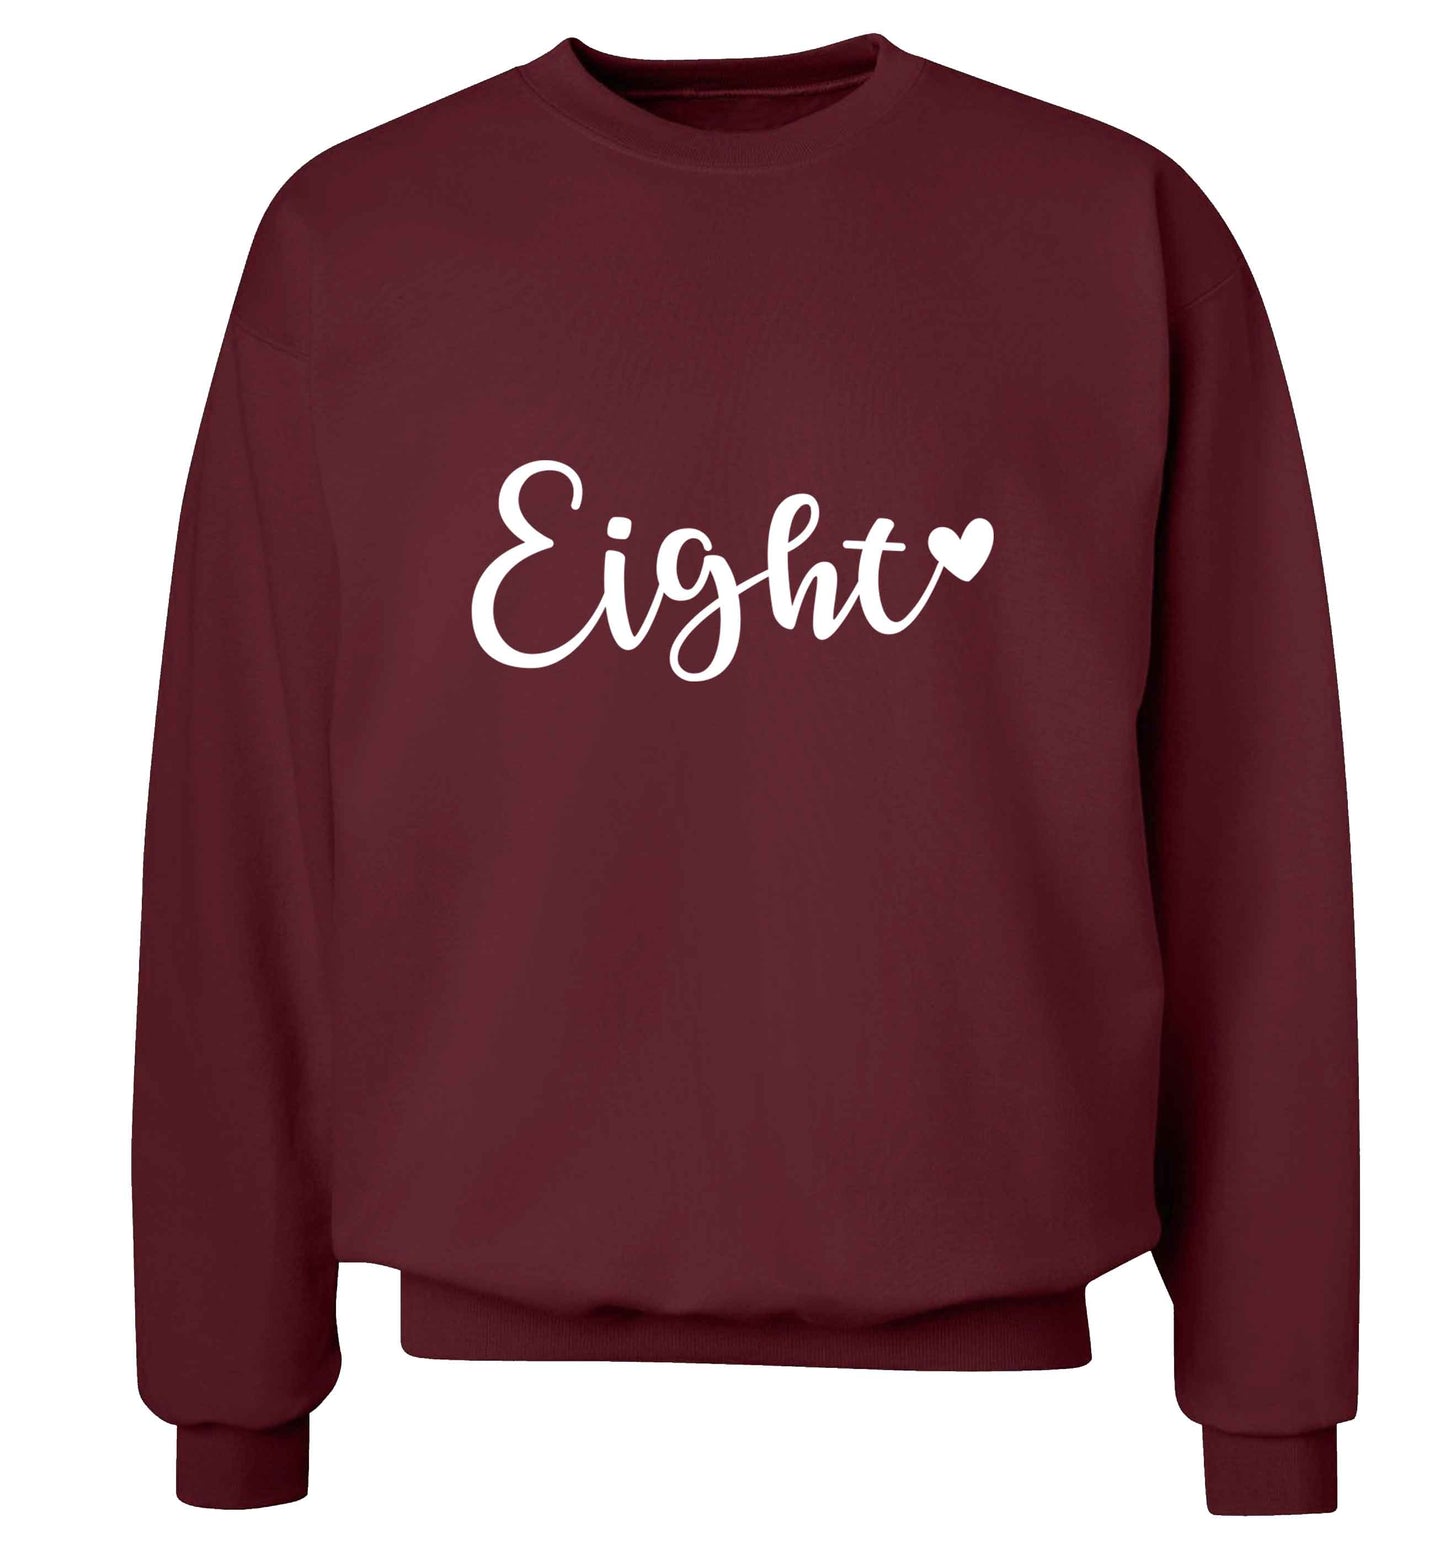 Eight and heart adult's unisex maroon sweater 2XL